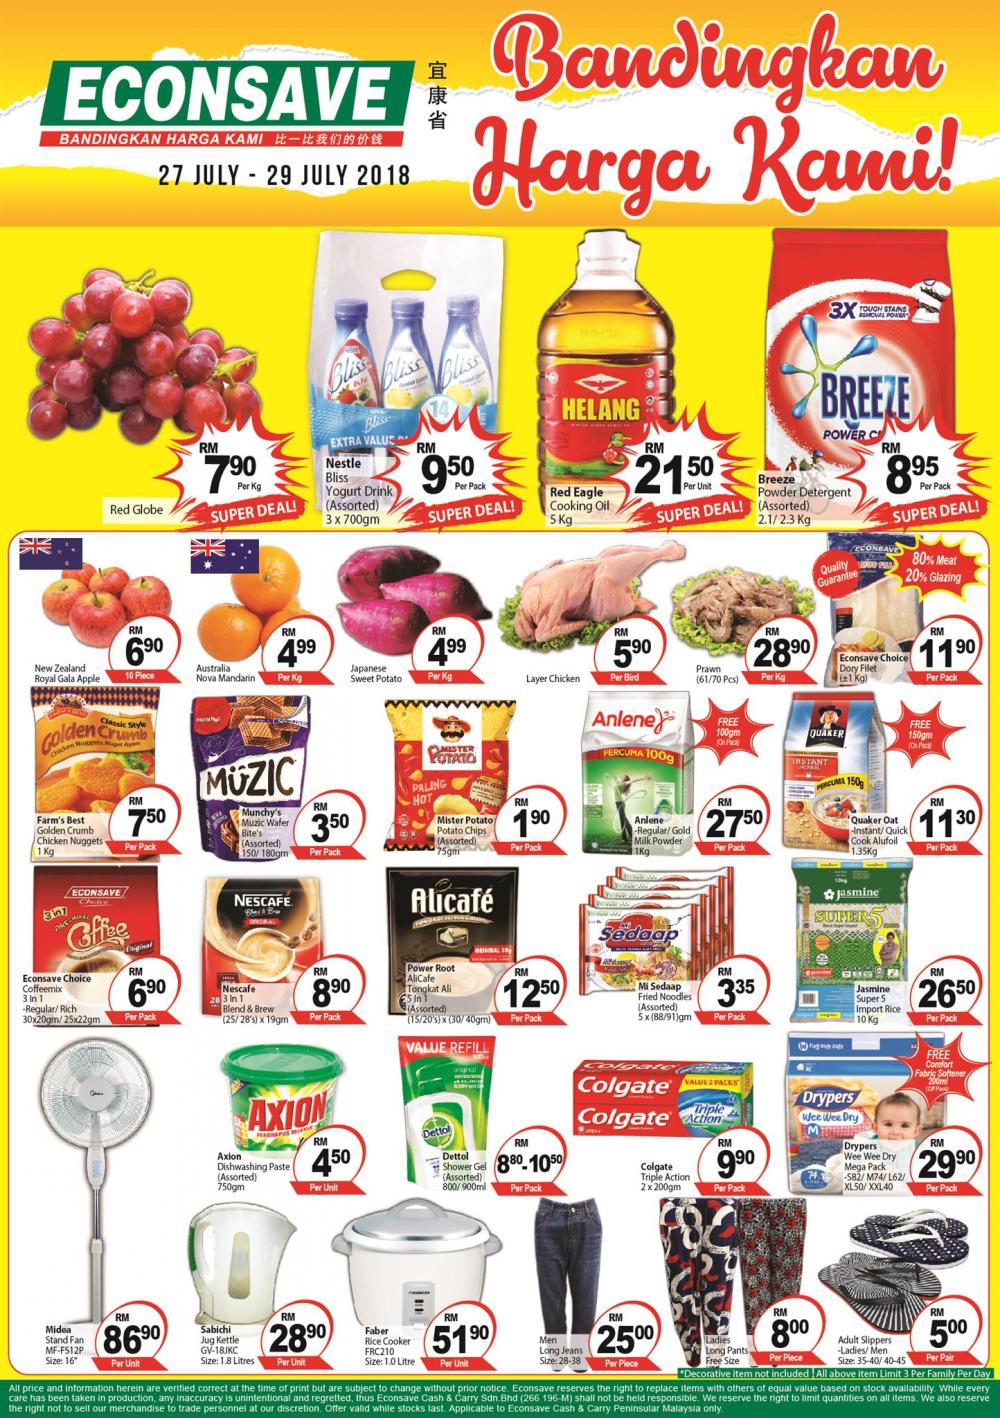 Econsave Weekend Promotion (27 July 2018 - 29 July 2018)